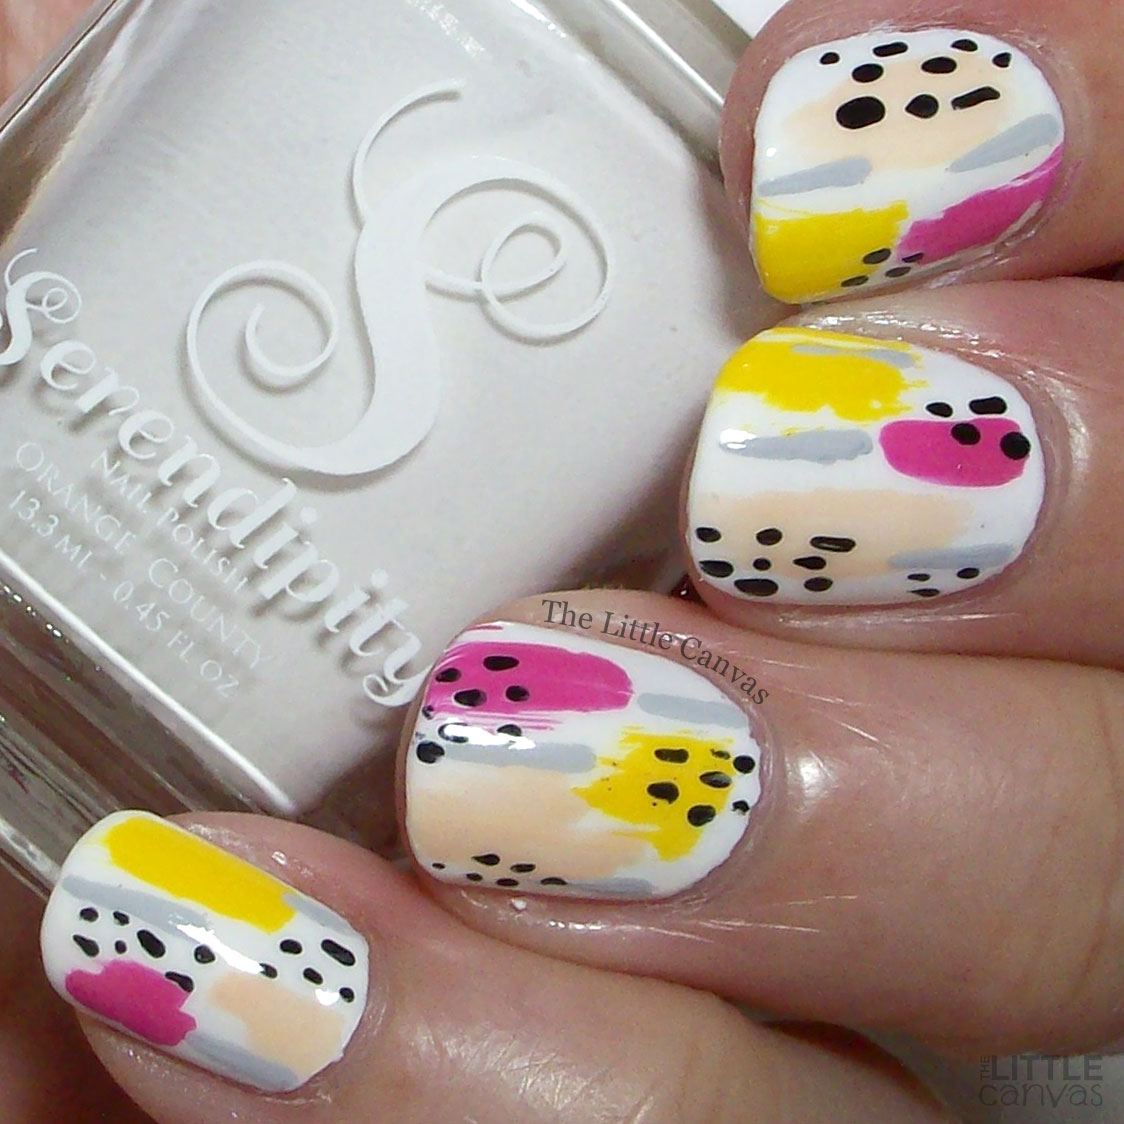 The One With the Serendipity Polish Abstract Manicure - The Little Canvas